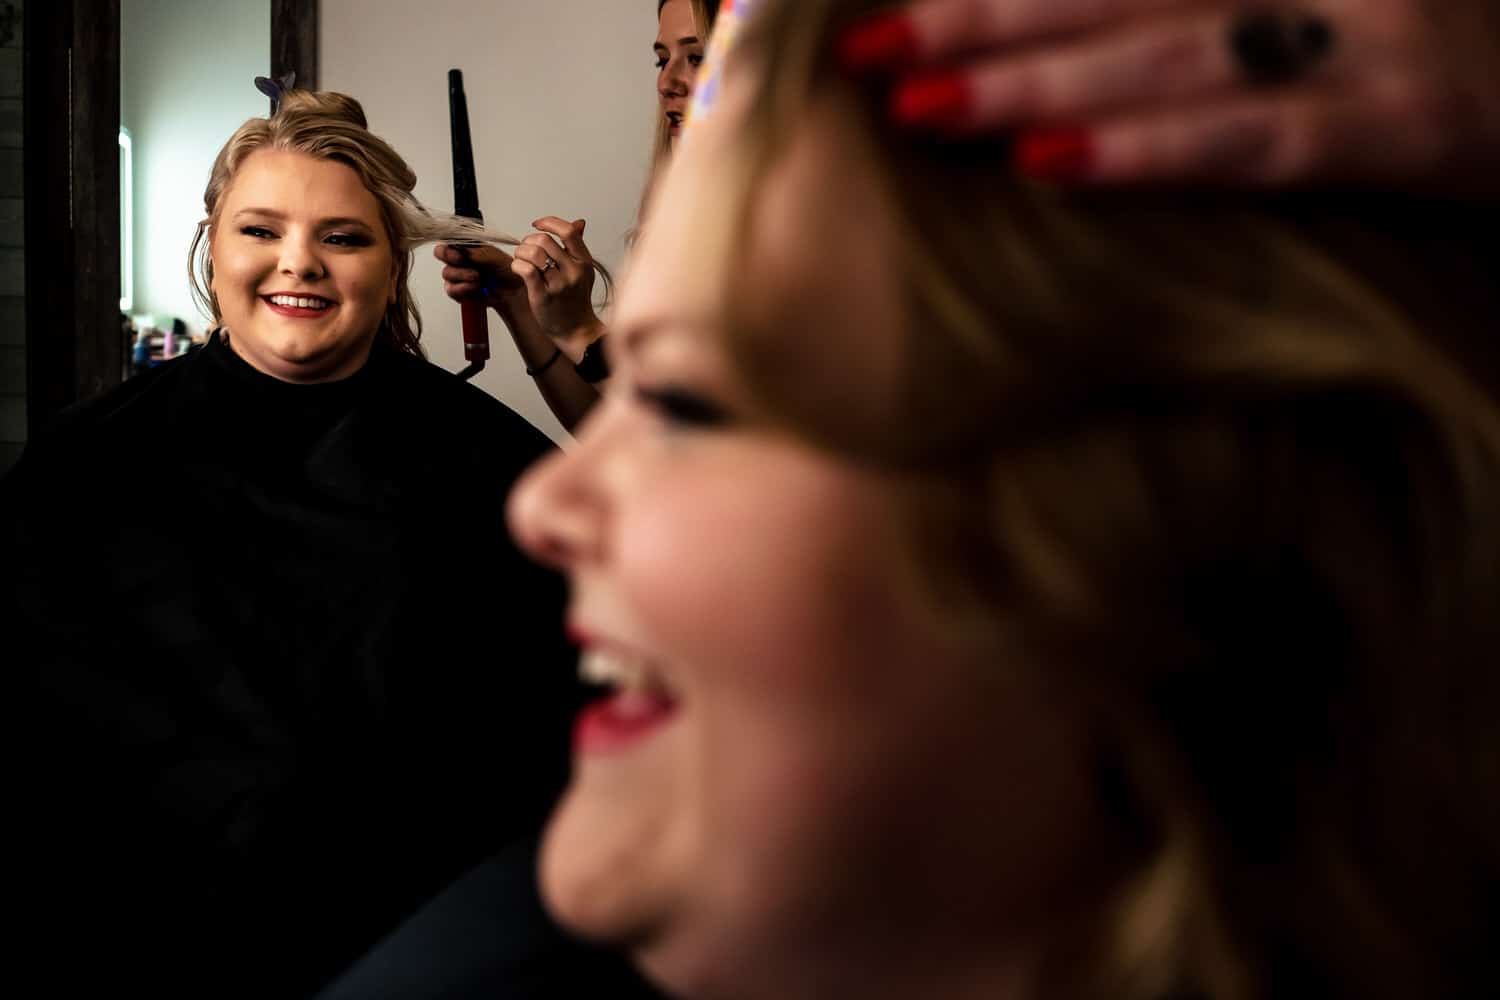 A candid, colorful picture of a woman getting her hair curled in the background, as her sister laughs candidly in the foreground. 